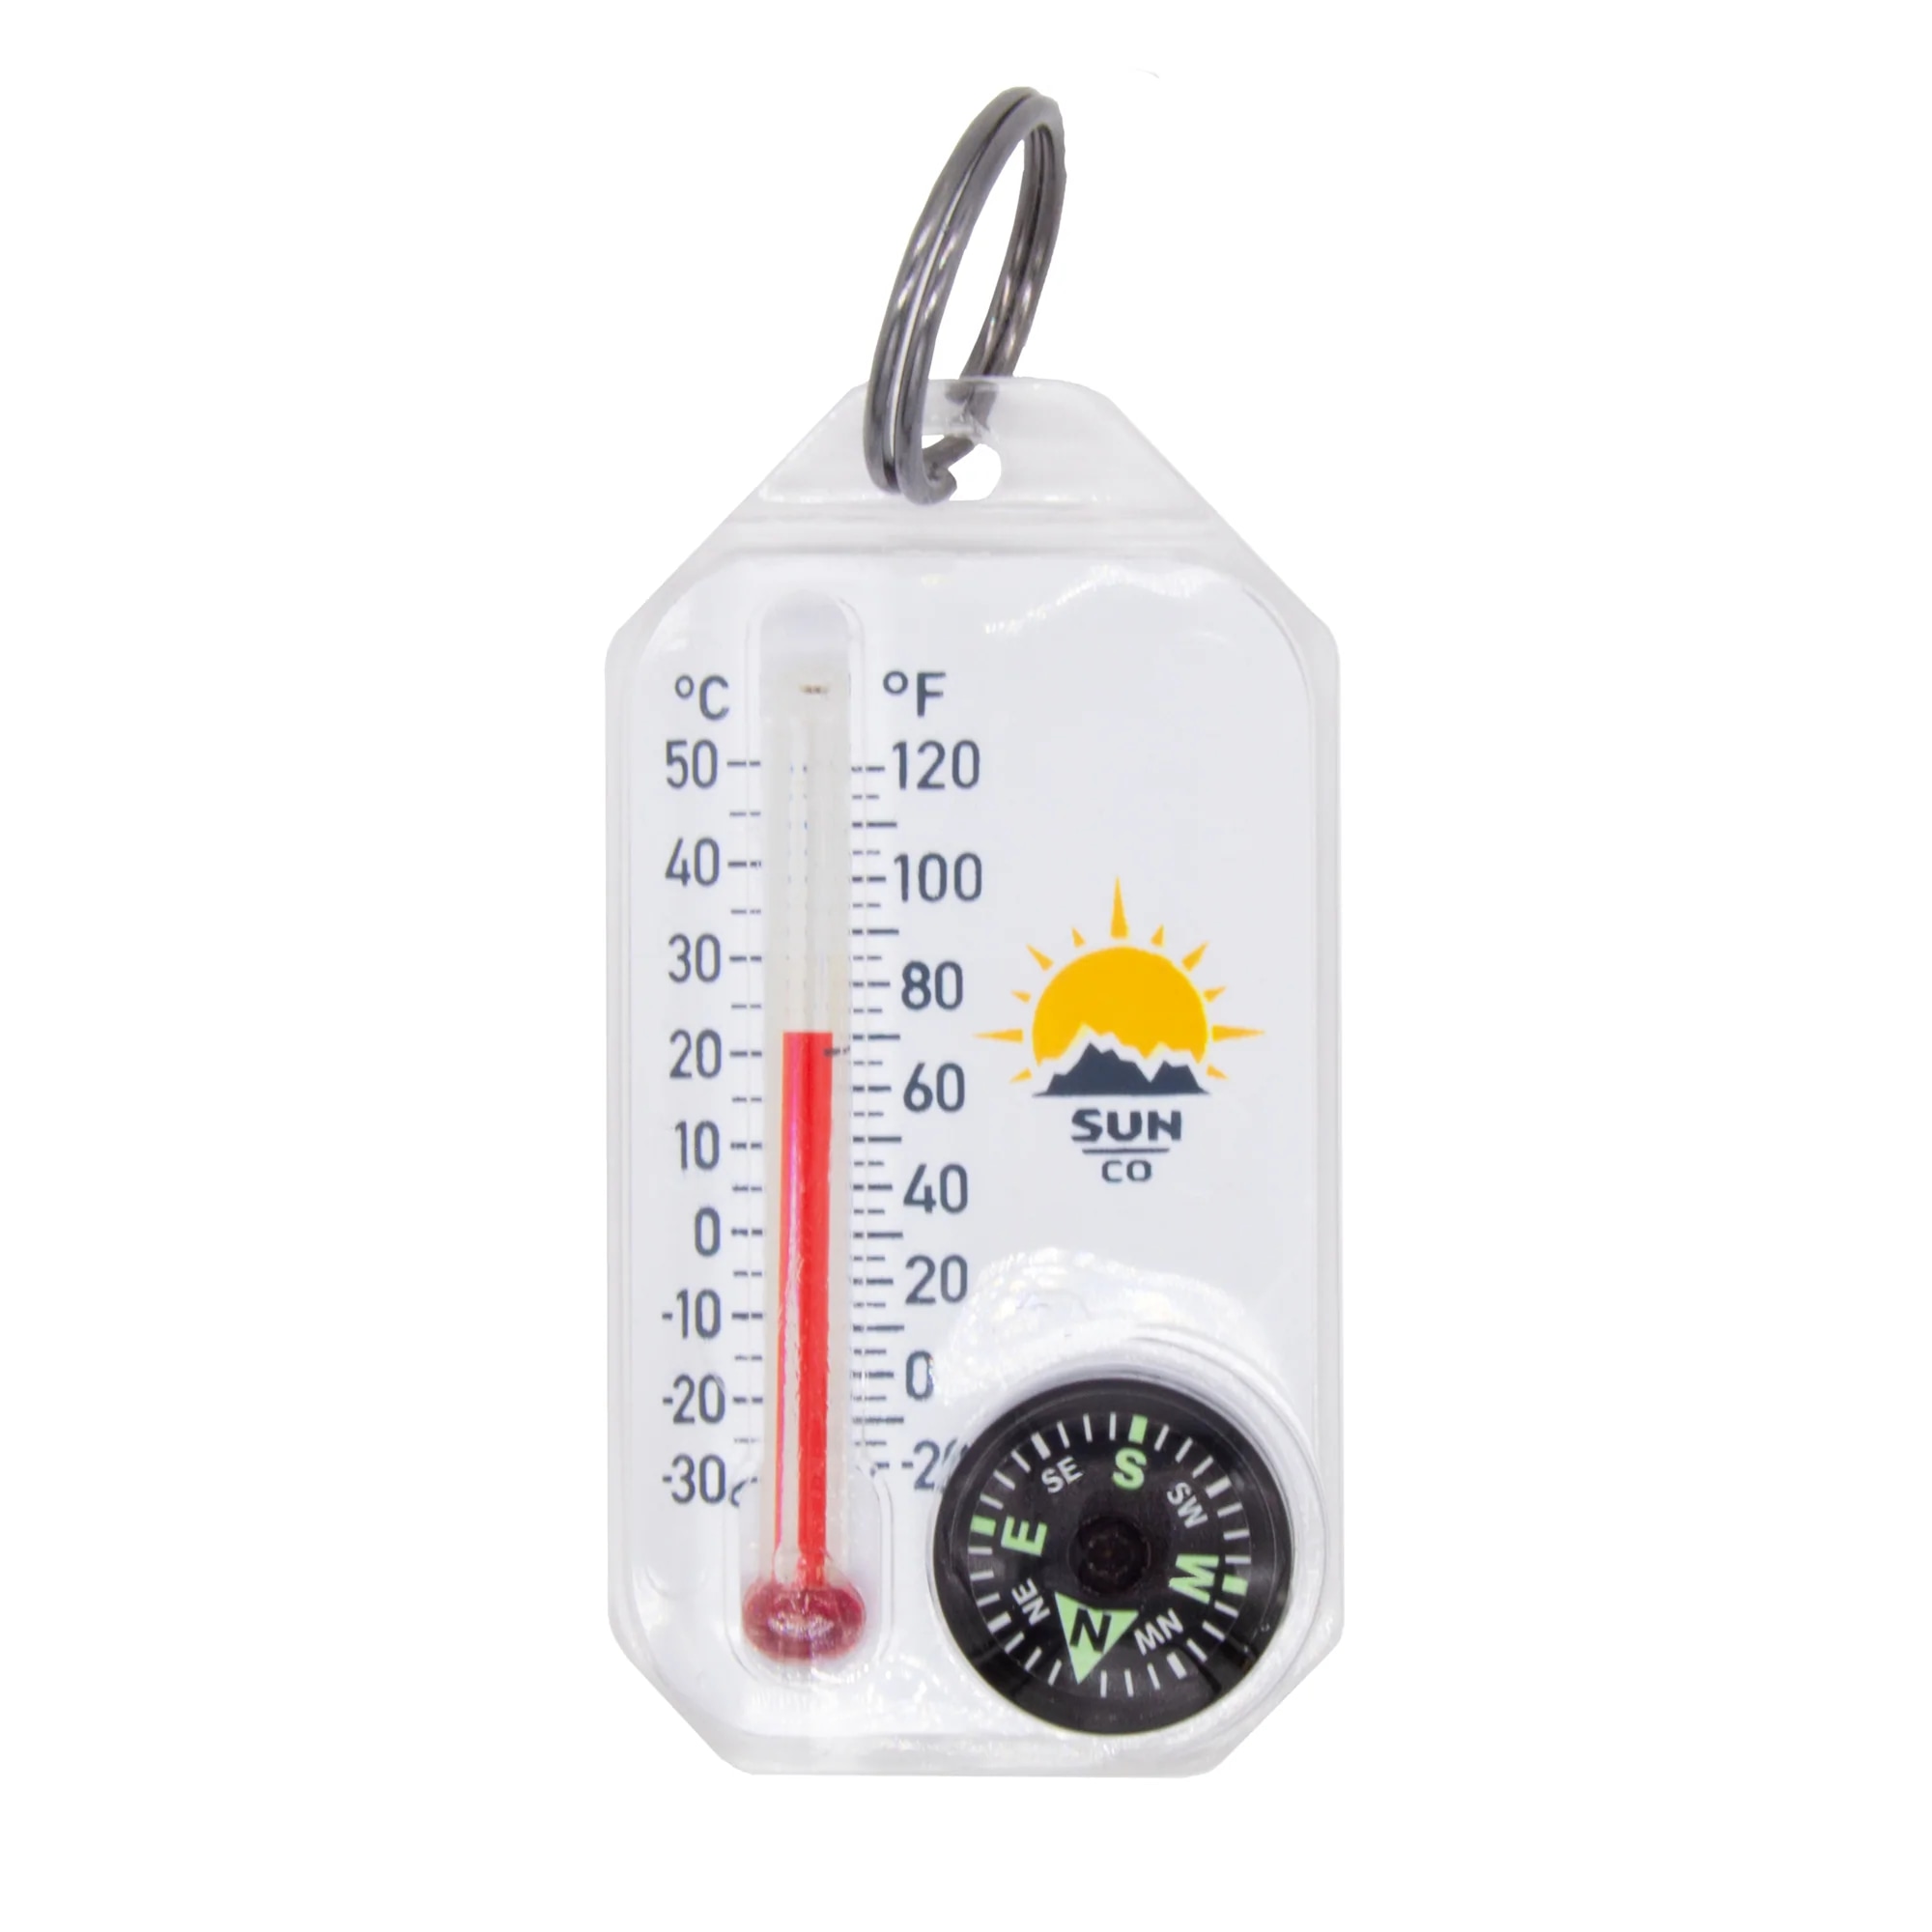 Therm-o-compass 2 Large Zipper Pull Compass/Thermometer